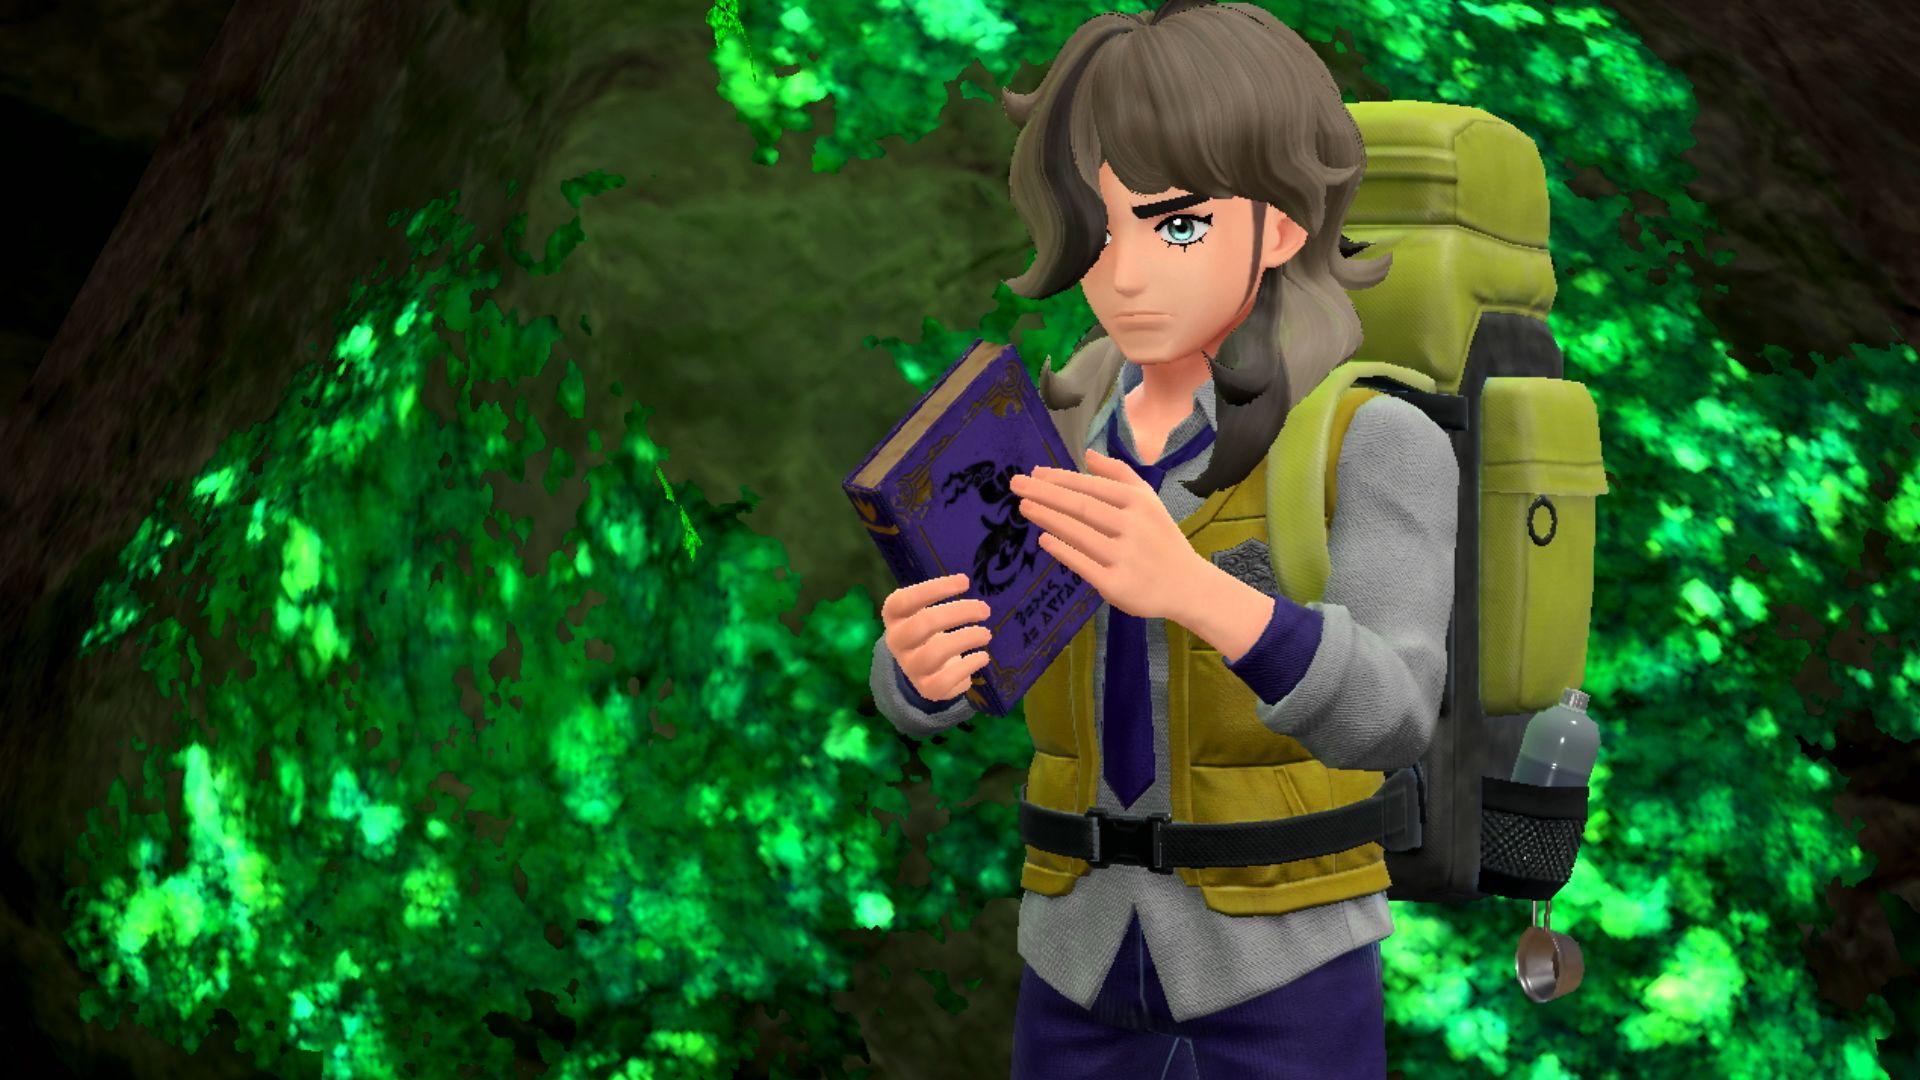 Paradox Pokémon In Scarlet & Violet: How Reliable Are The Leaks?